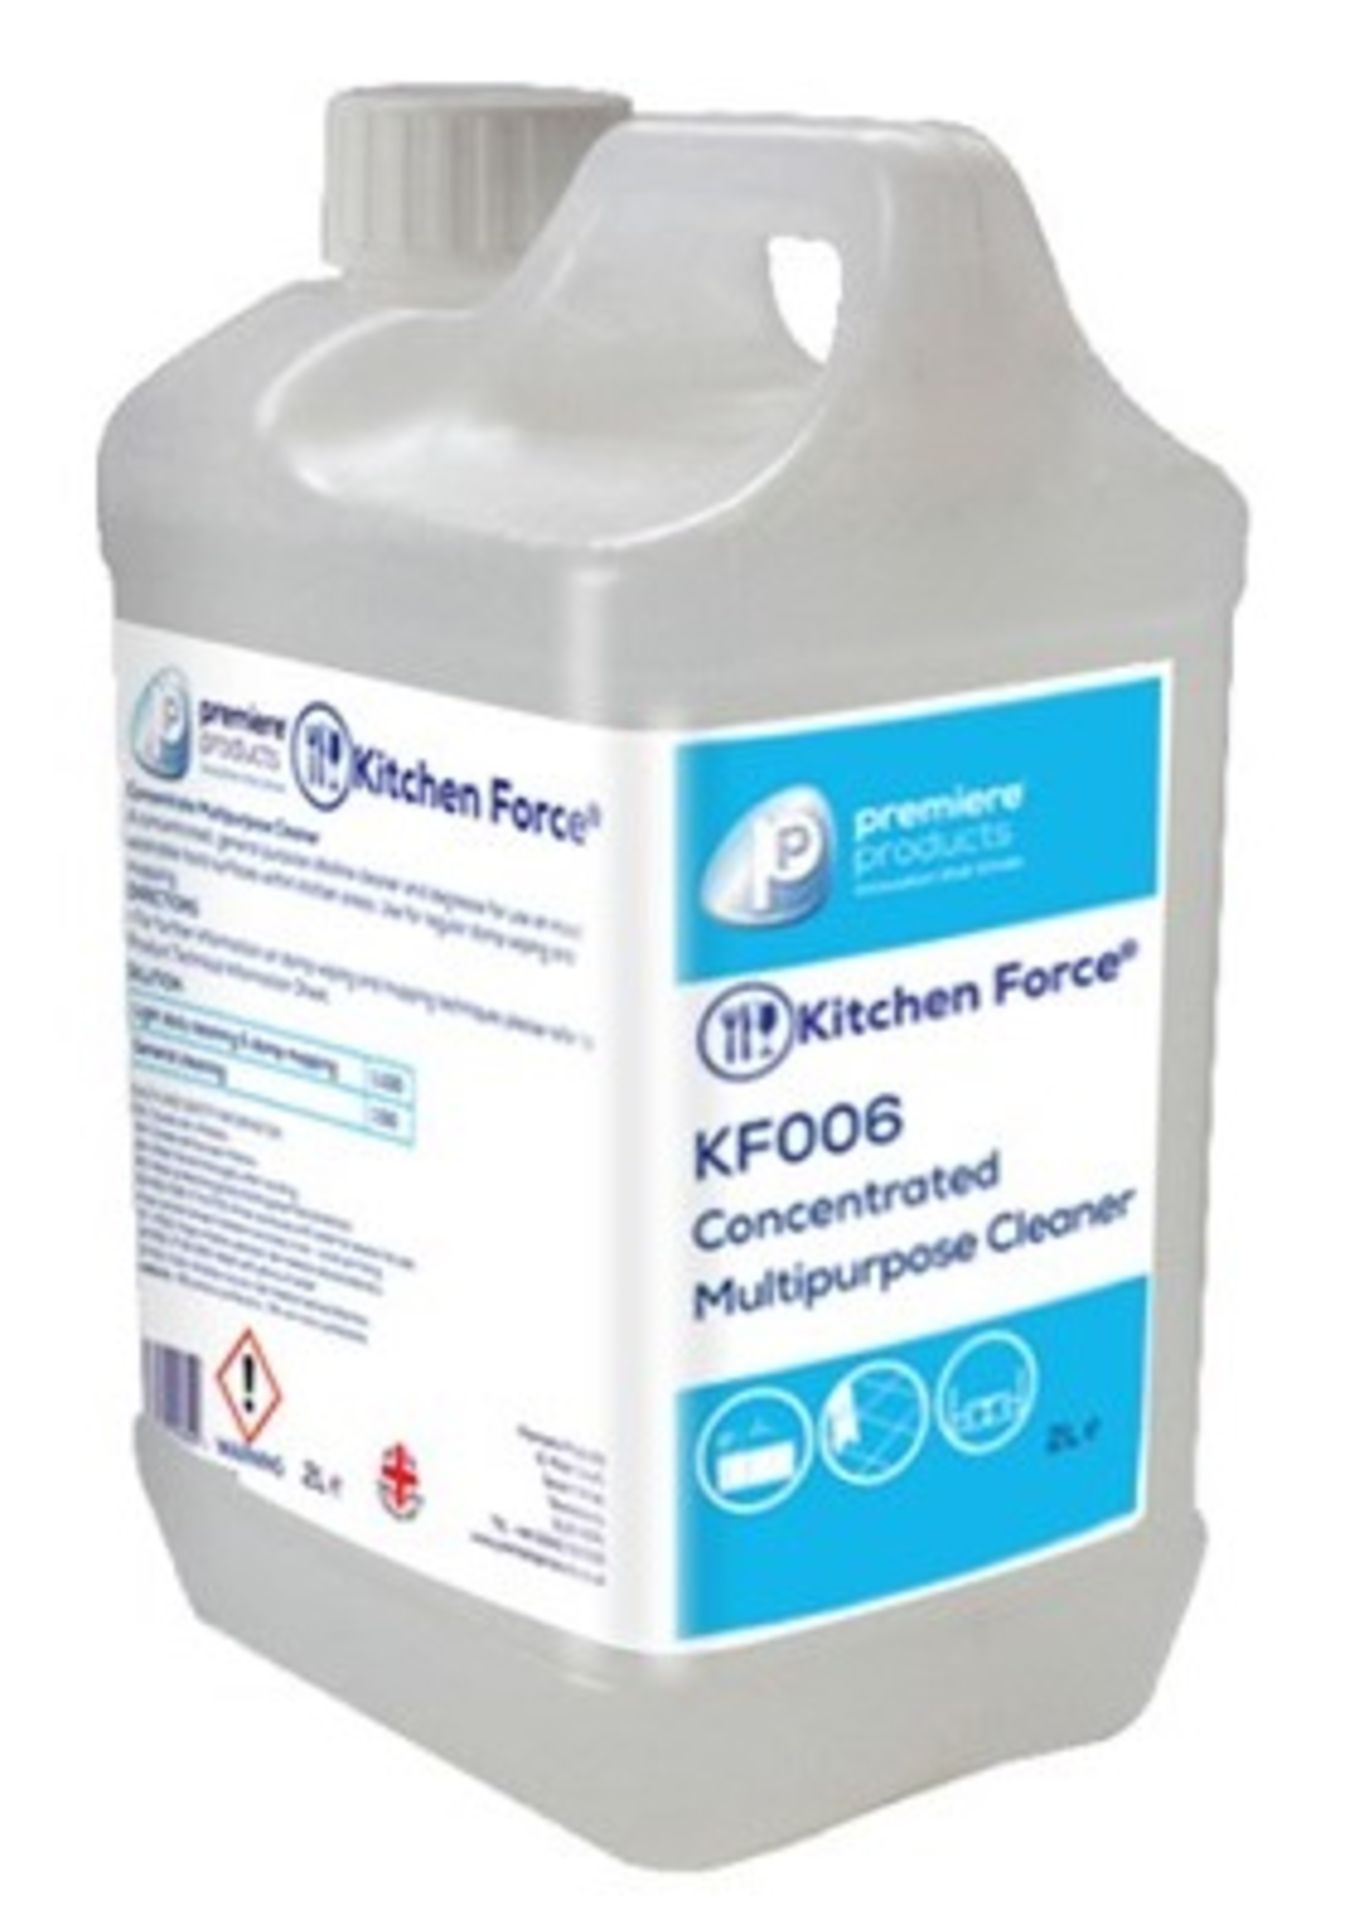 20 x Kitchen Force 2 Litre Multipurpose Cleaner and Degreaser - Premiere Products - General Purpose